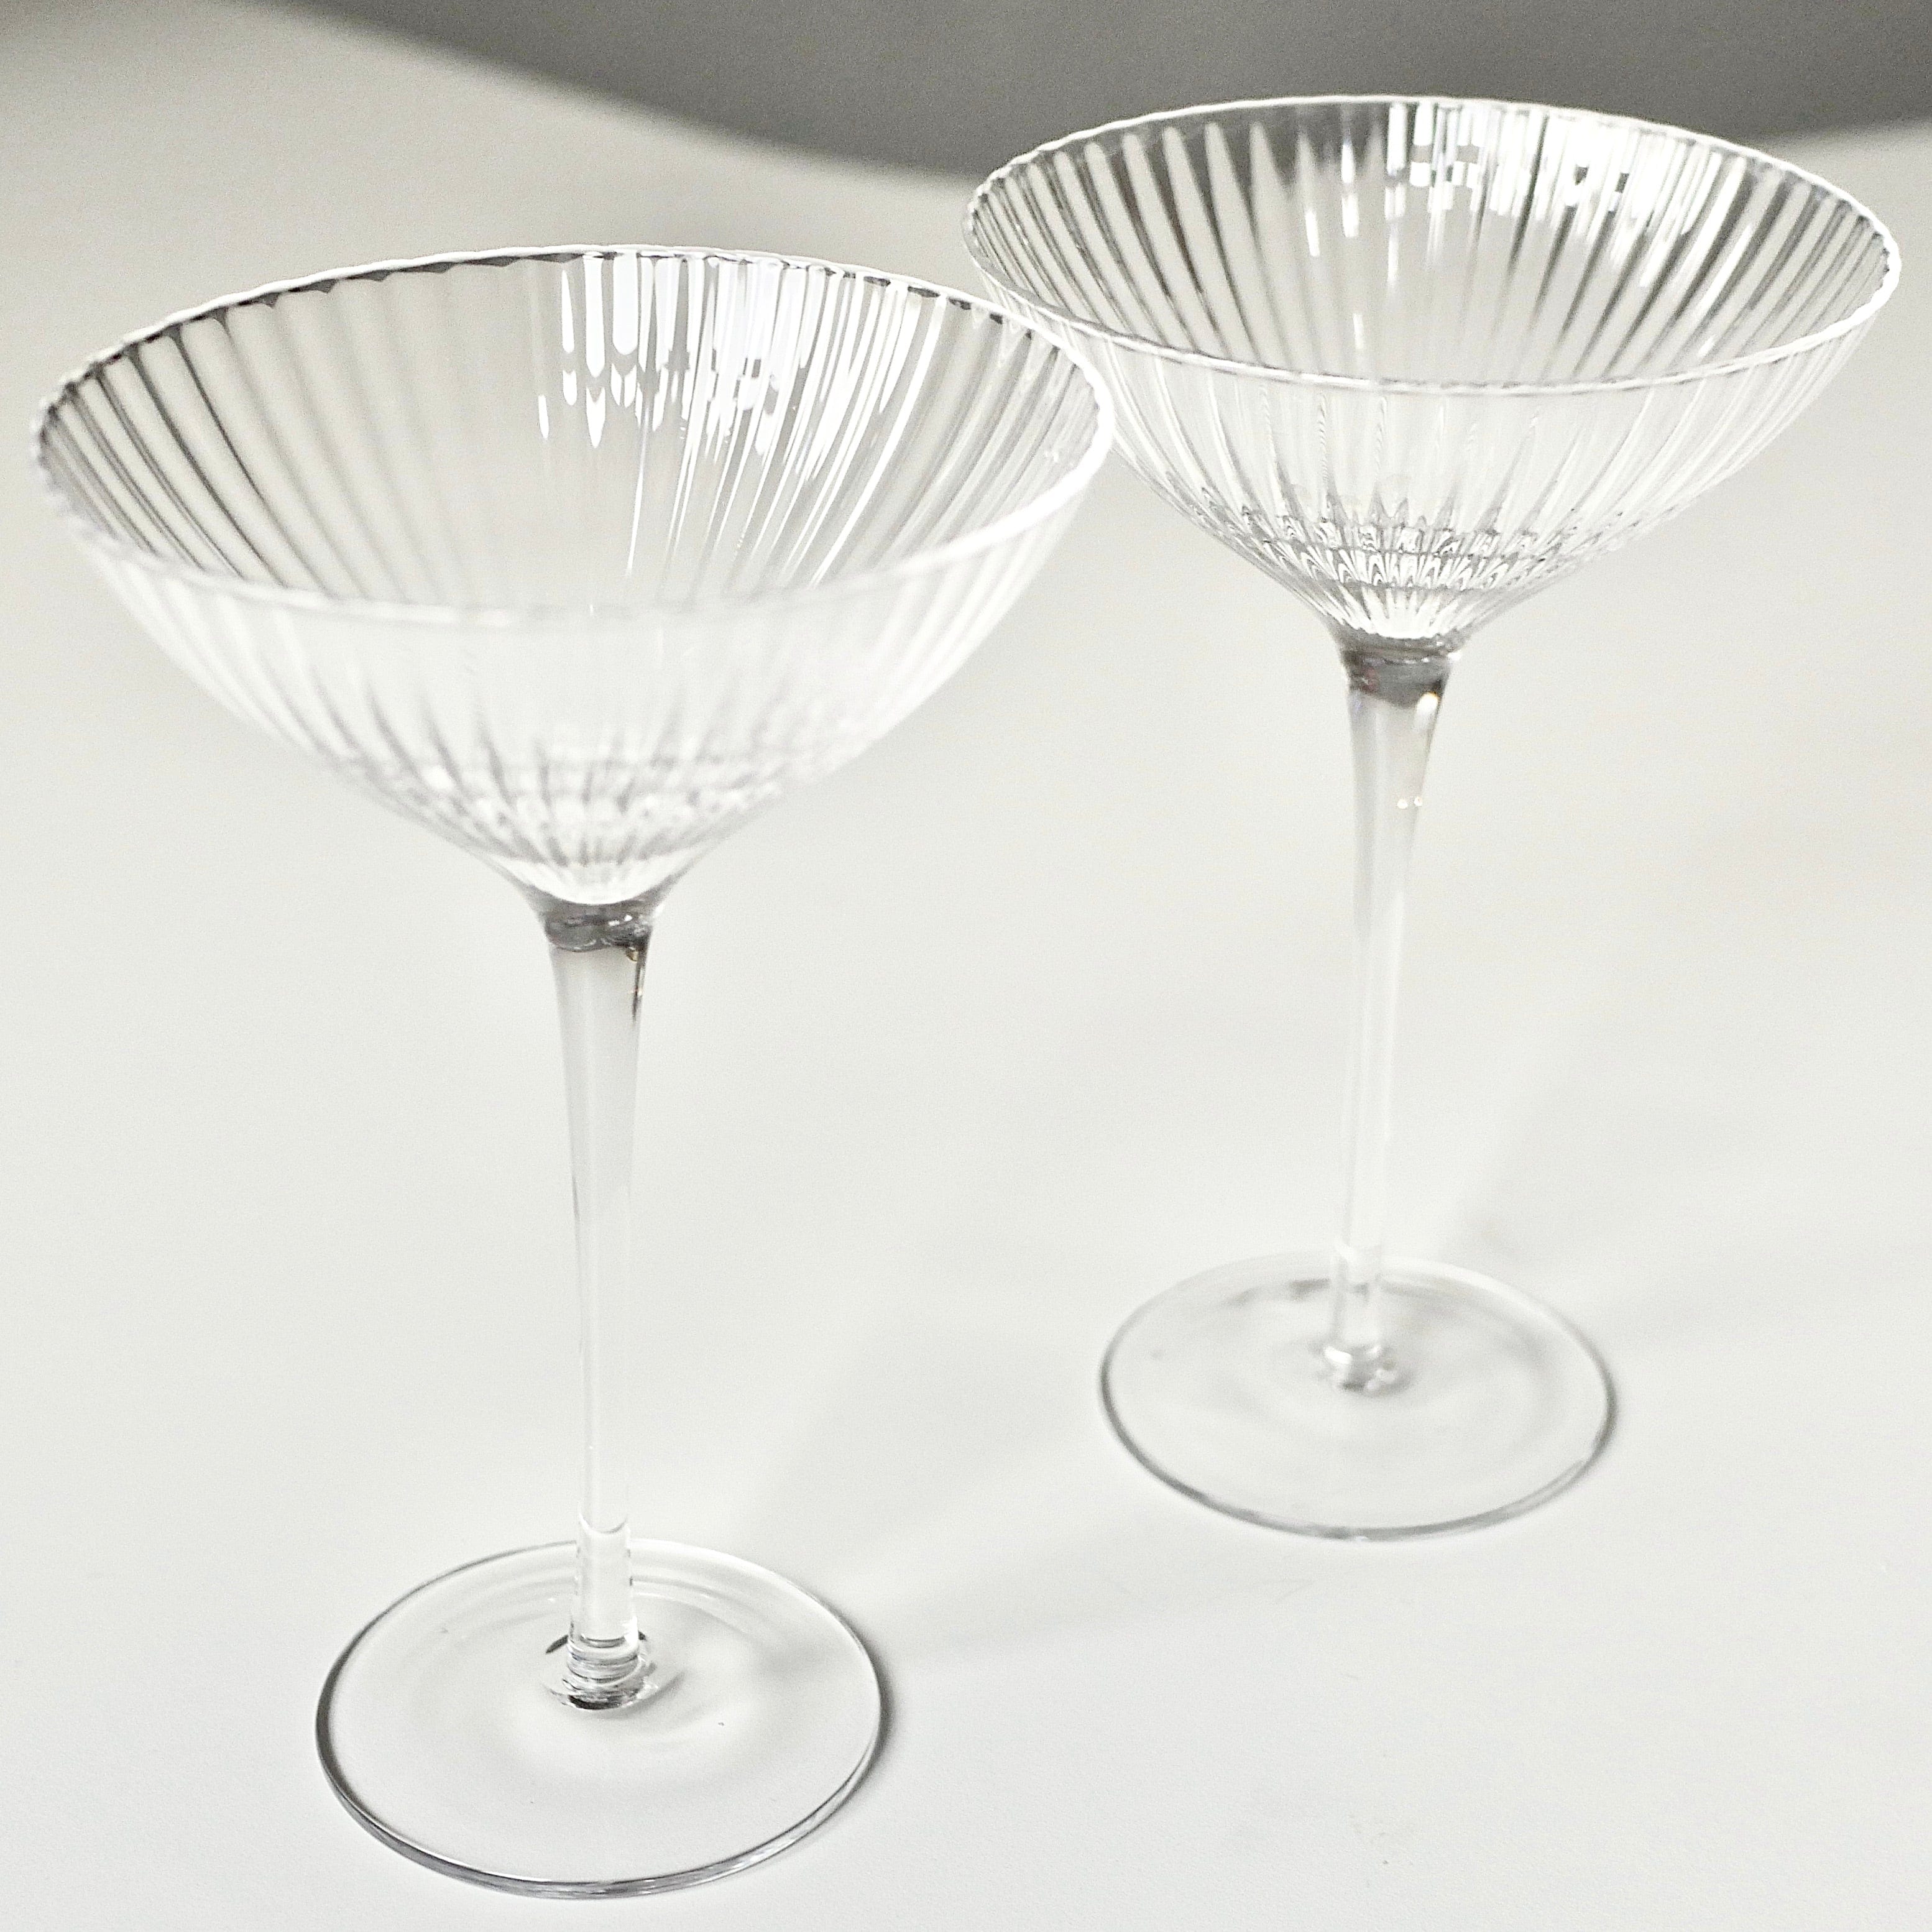 CARRIE CHAMPAGNE COUPES WITH SMALL AIR BUBBLES - Pair